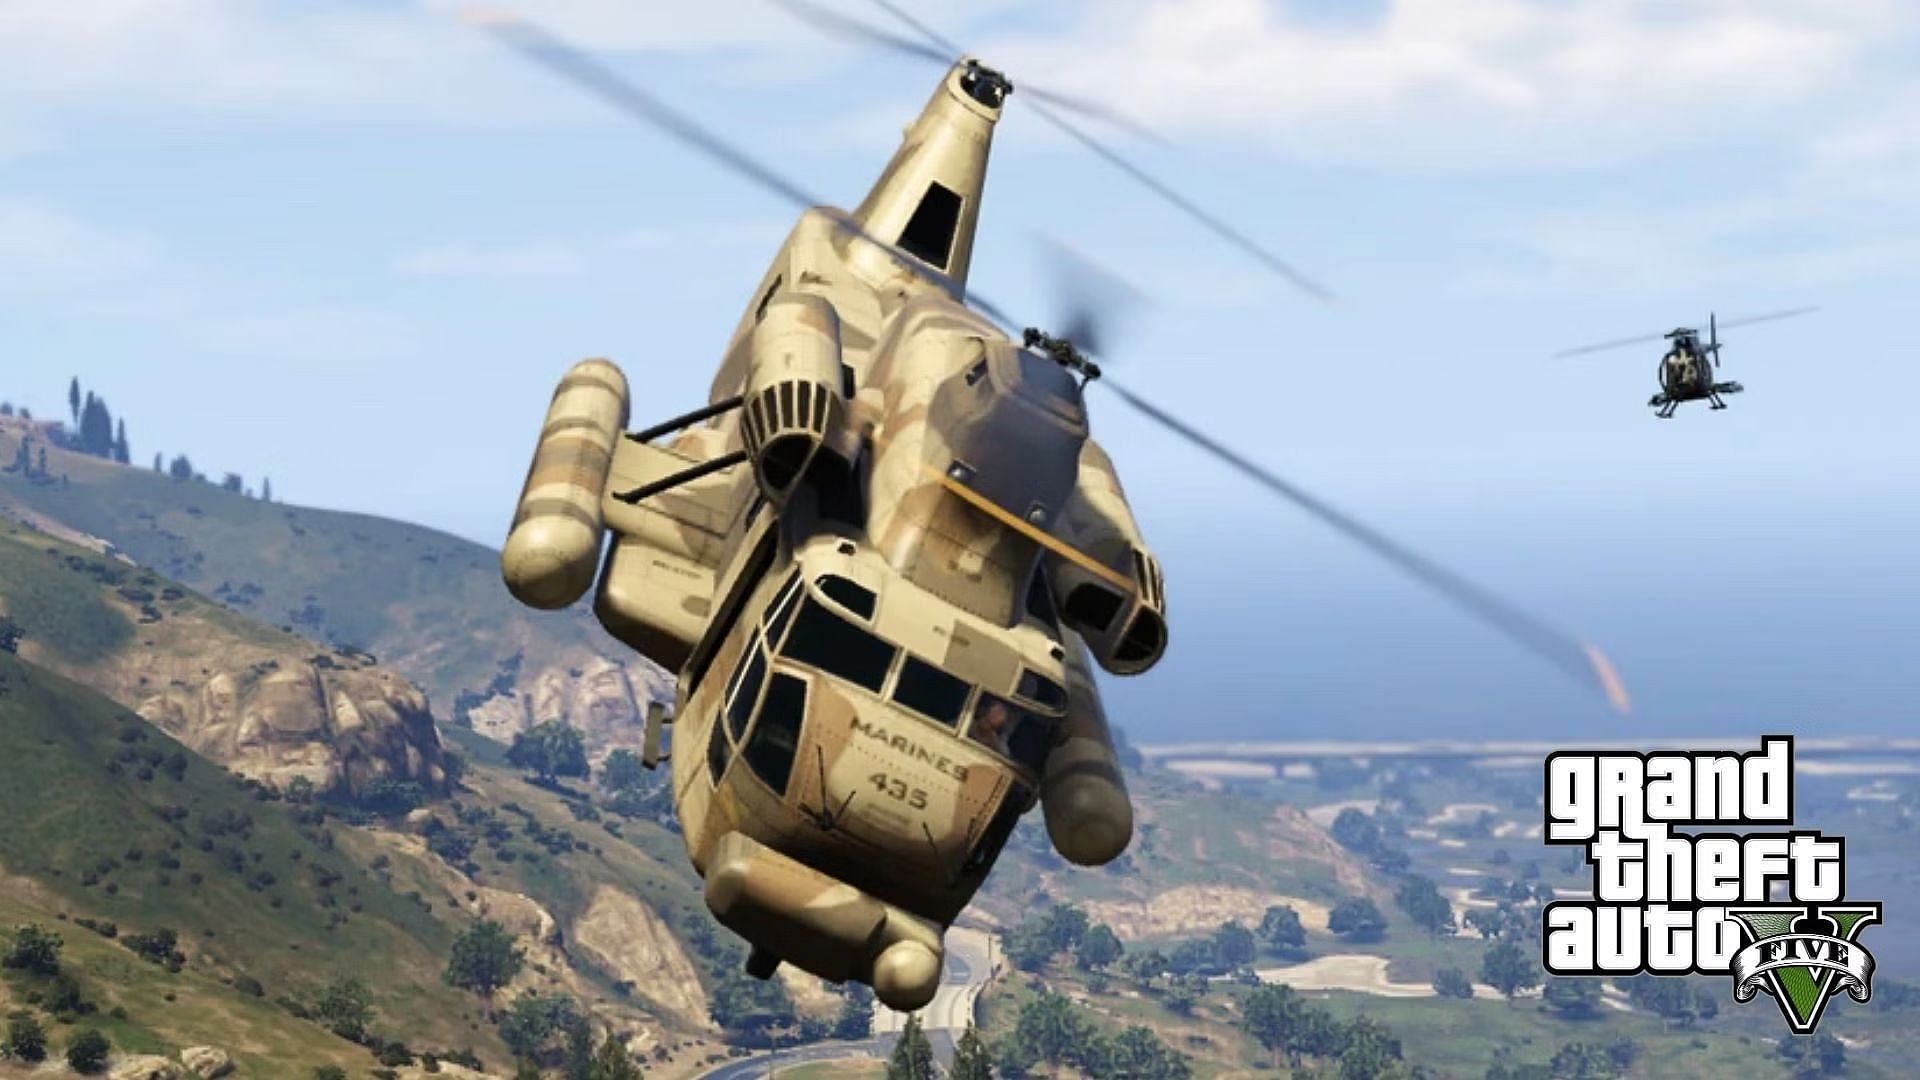 facts about Cargobob in GTA 5